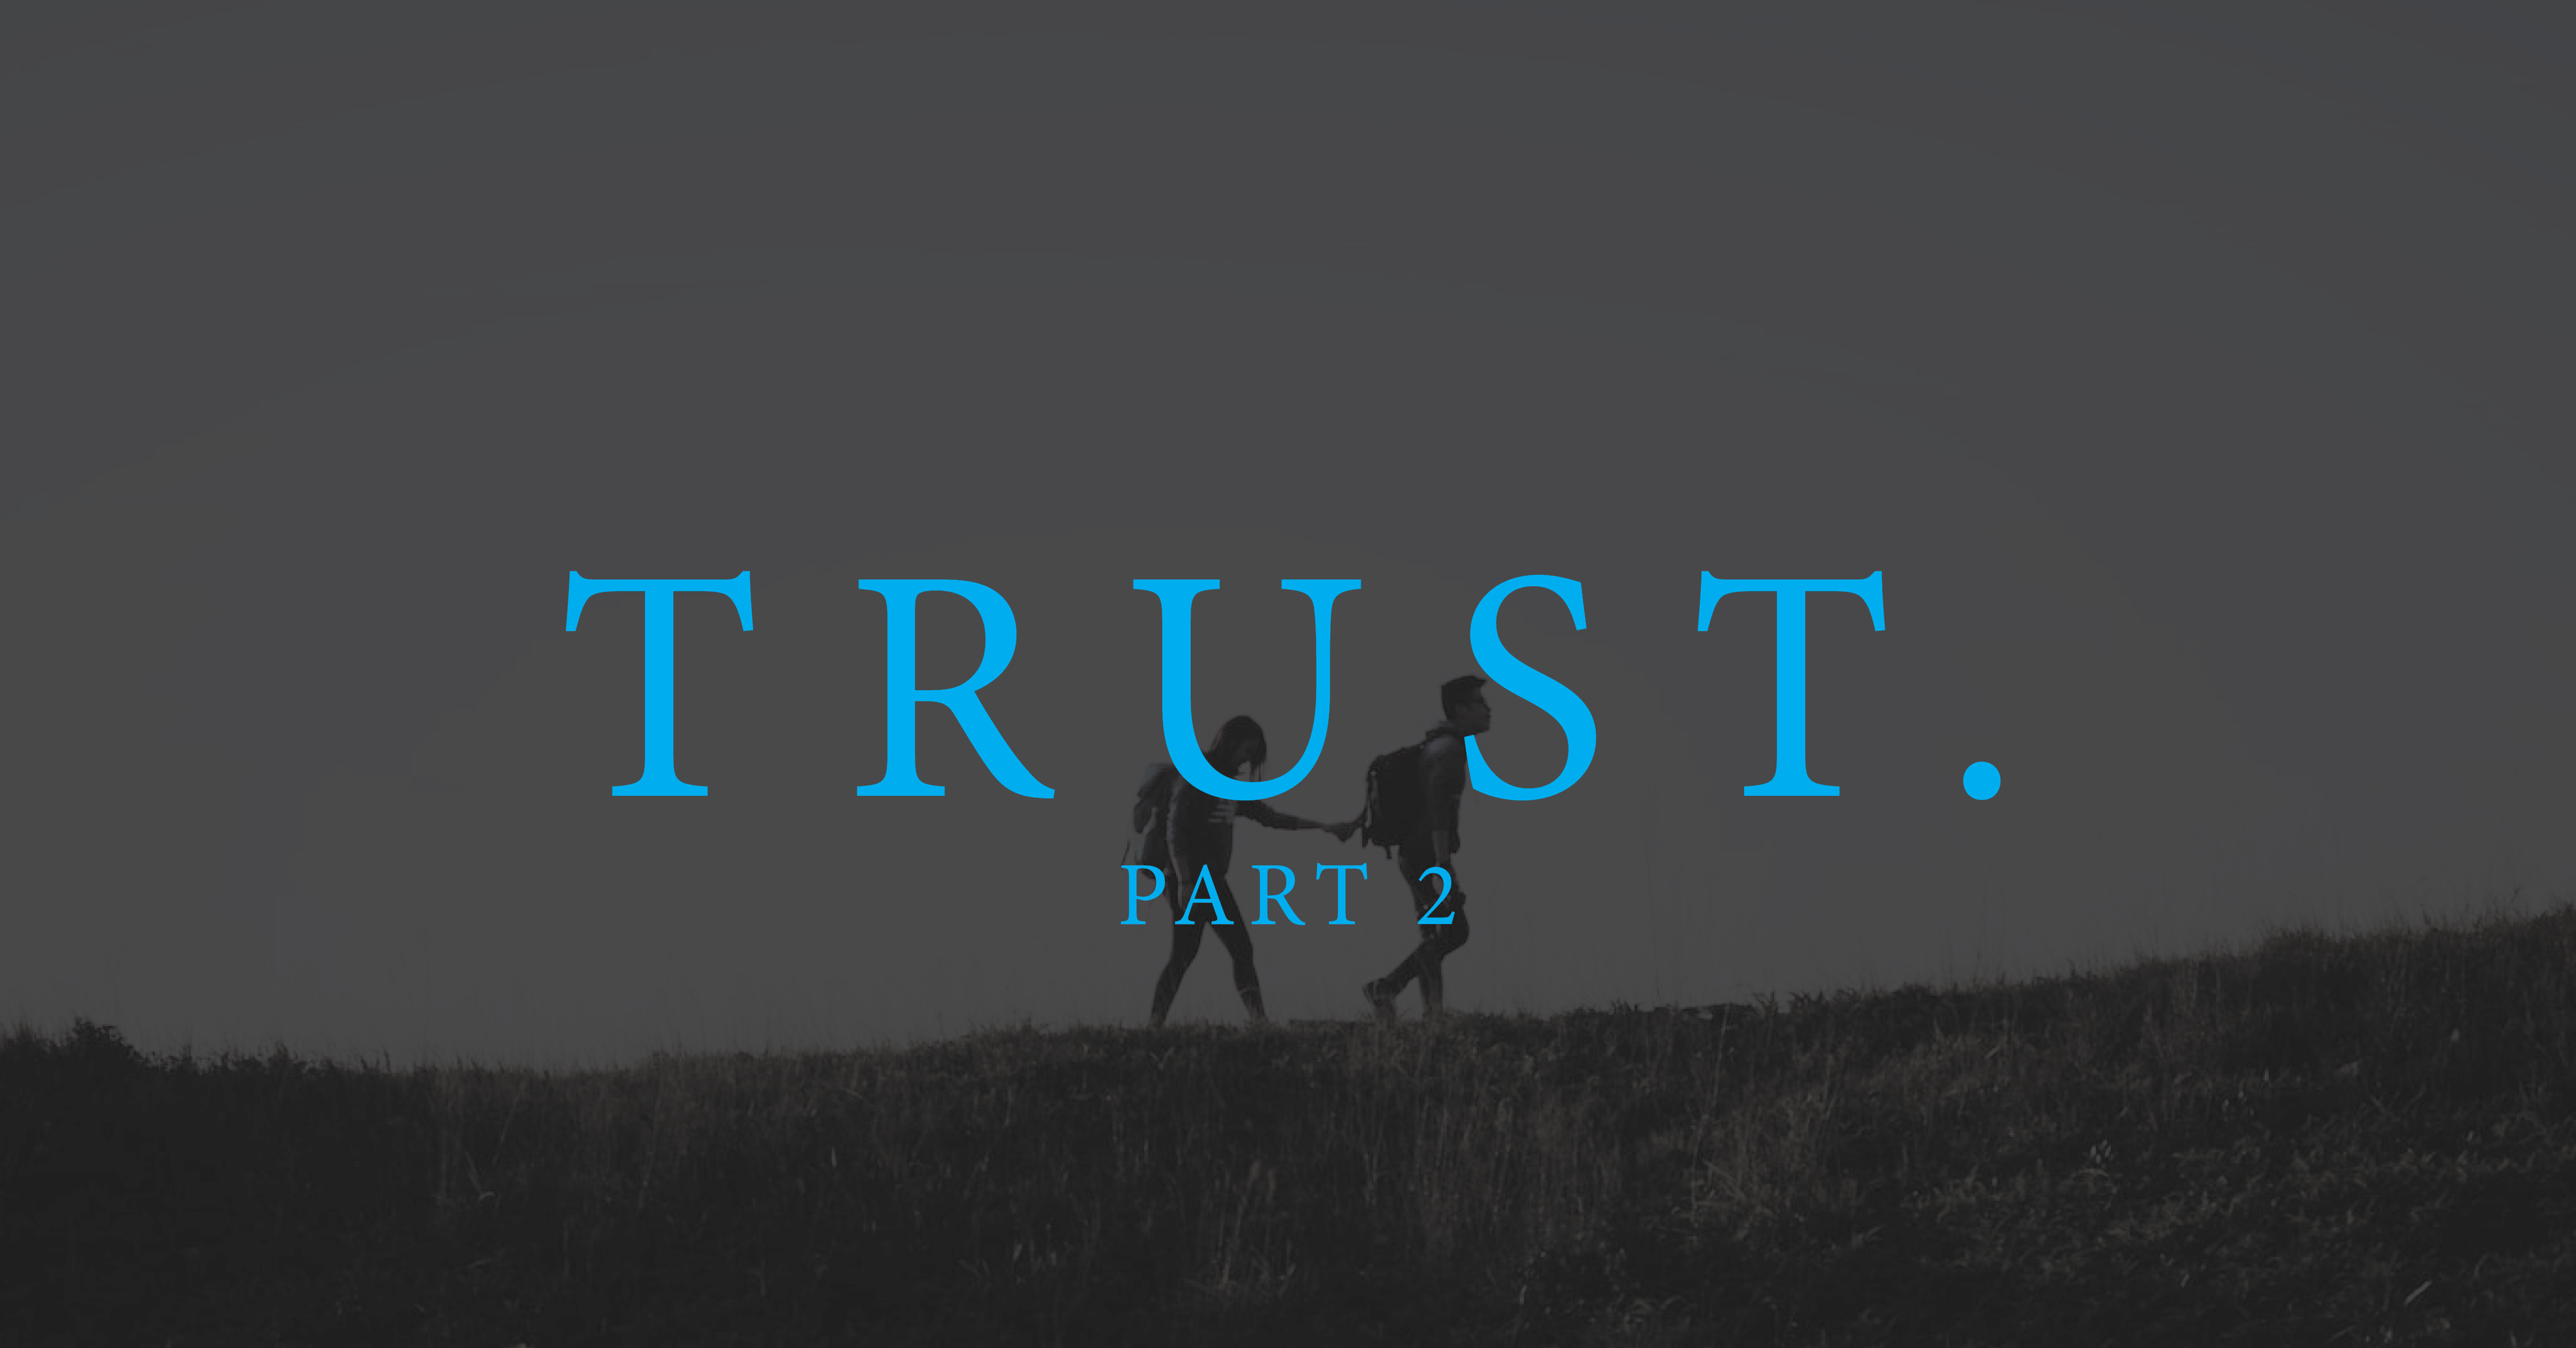 Can Your Website Be Trusted? -Part 2